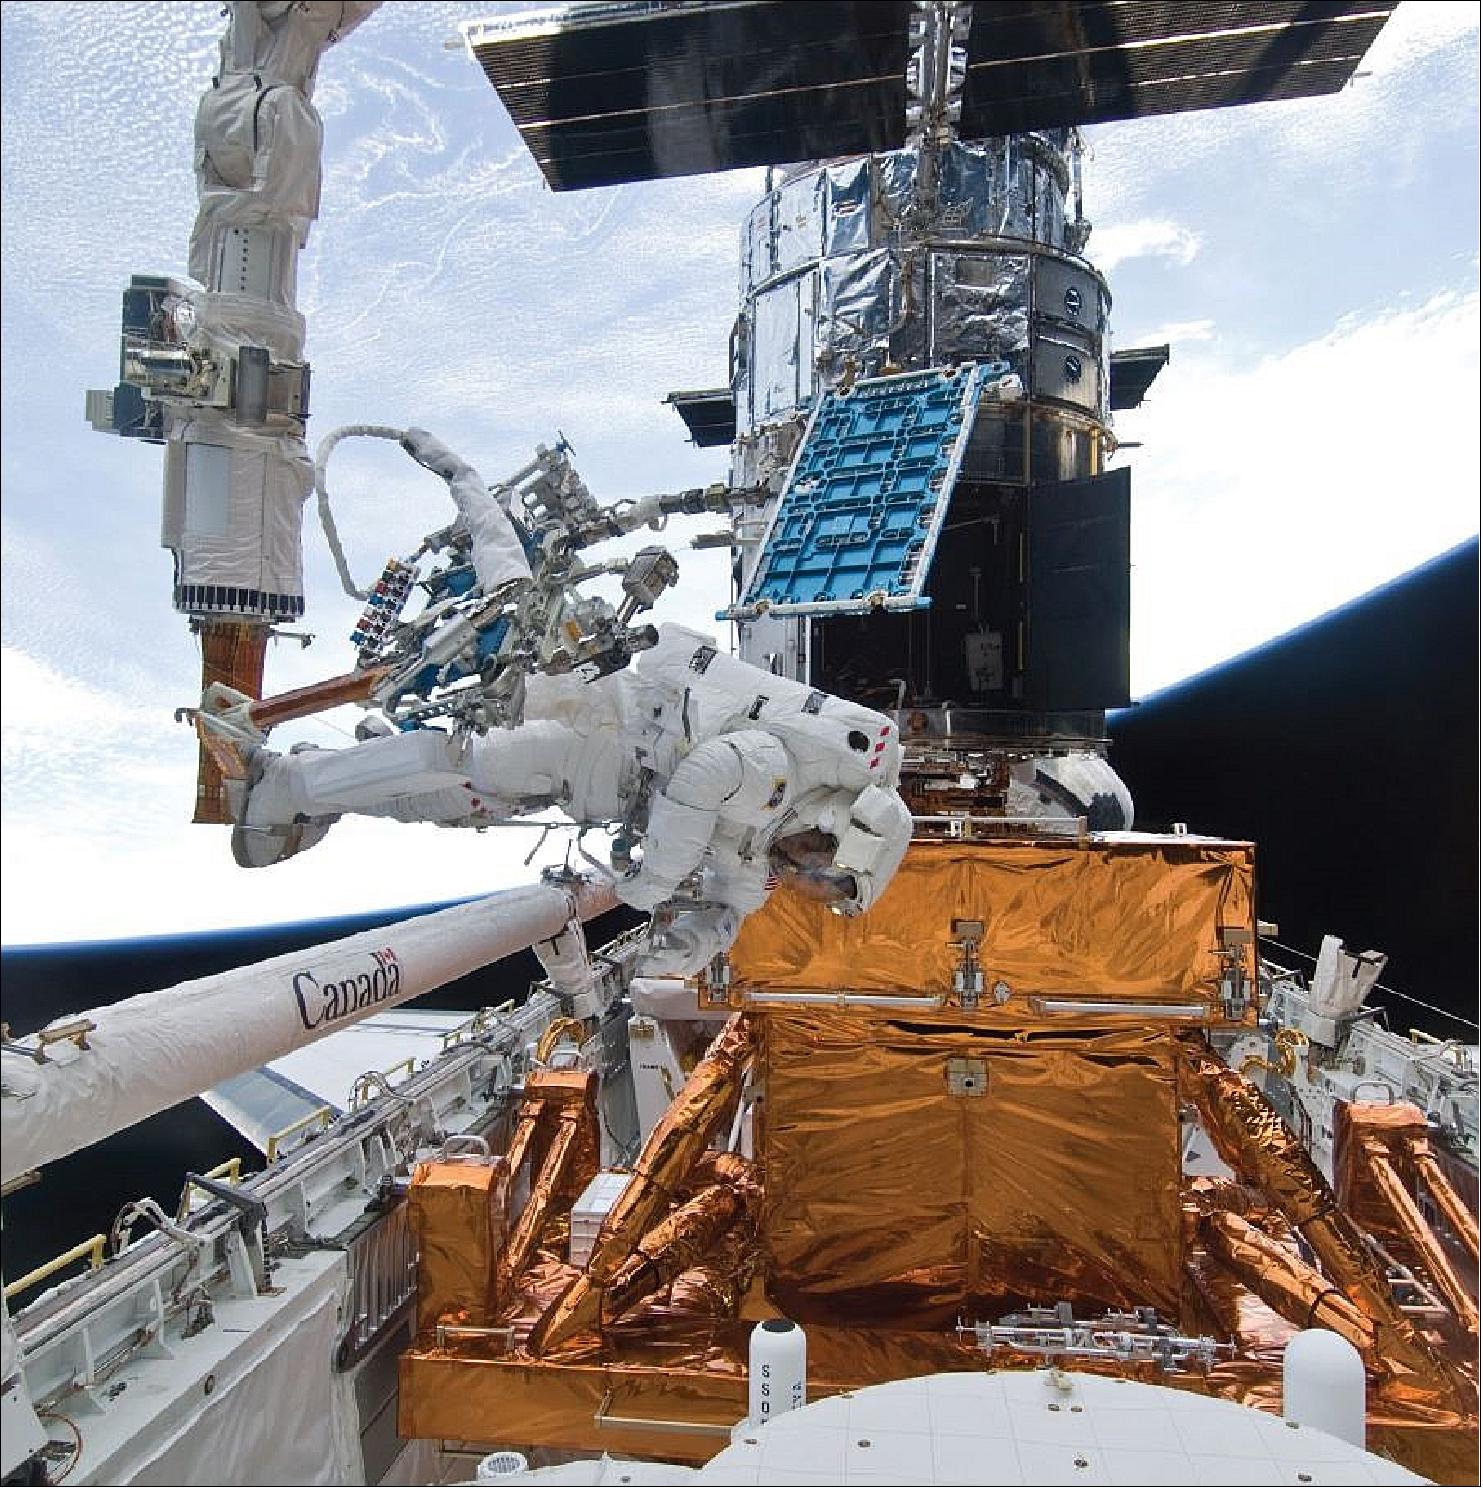 Figure 70: With his feet firmly anchored on the shuttle’s robotic arm, astronaut Mike Good maneuvers to retrieve the tool caddy required to repair the Space Telescope Imaging Spectrograph during the final Hubble servicing mission in May 2009. Periodic upgrades have kept the telescope equipped with state-of-the-art instruments, which have given astronomers increasingly better views of the cosmos (image credit: NASA)